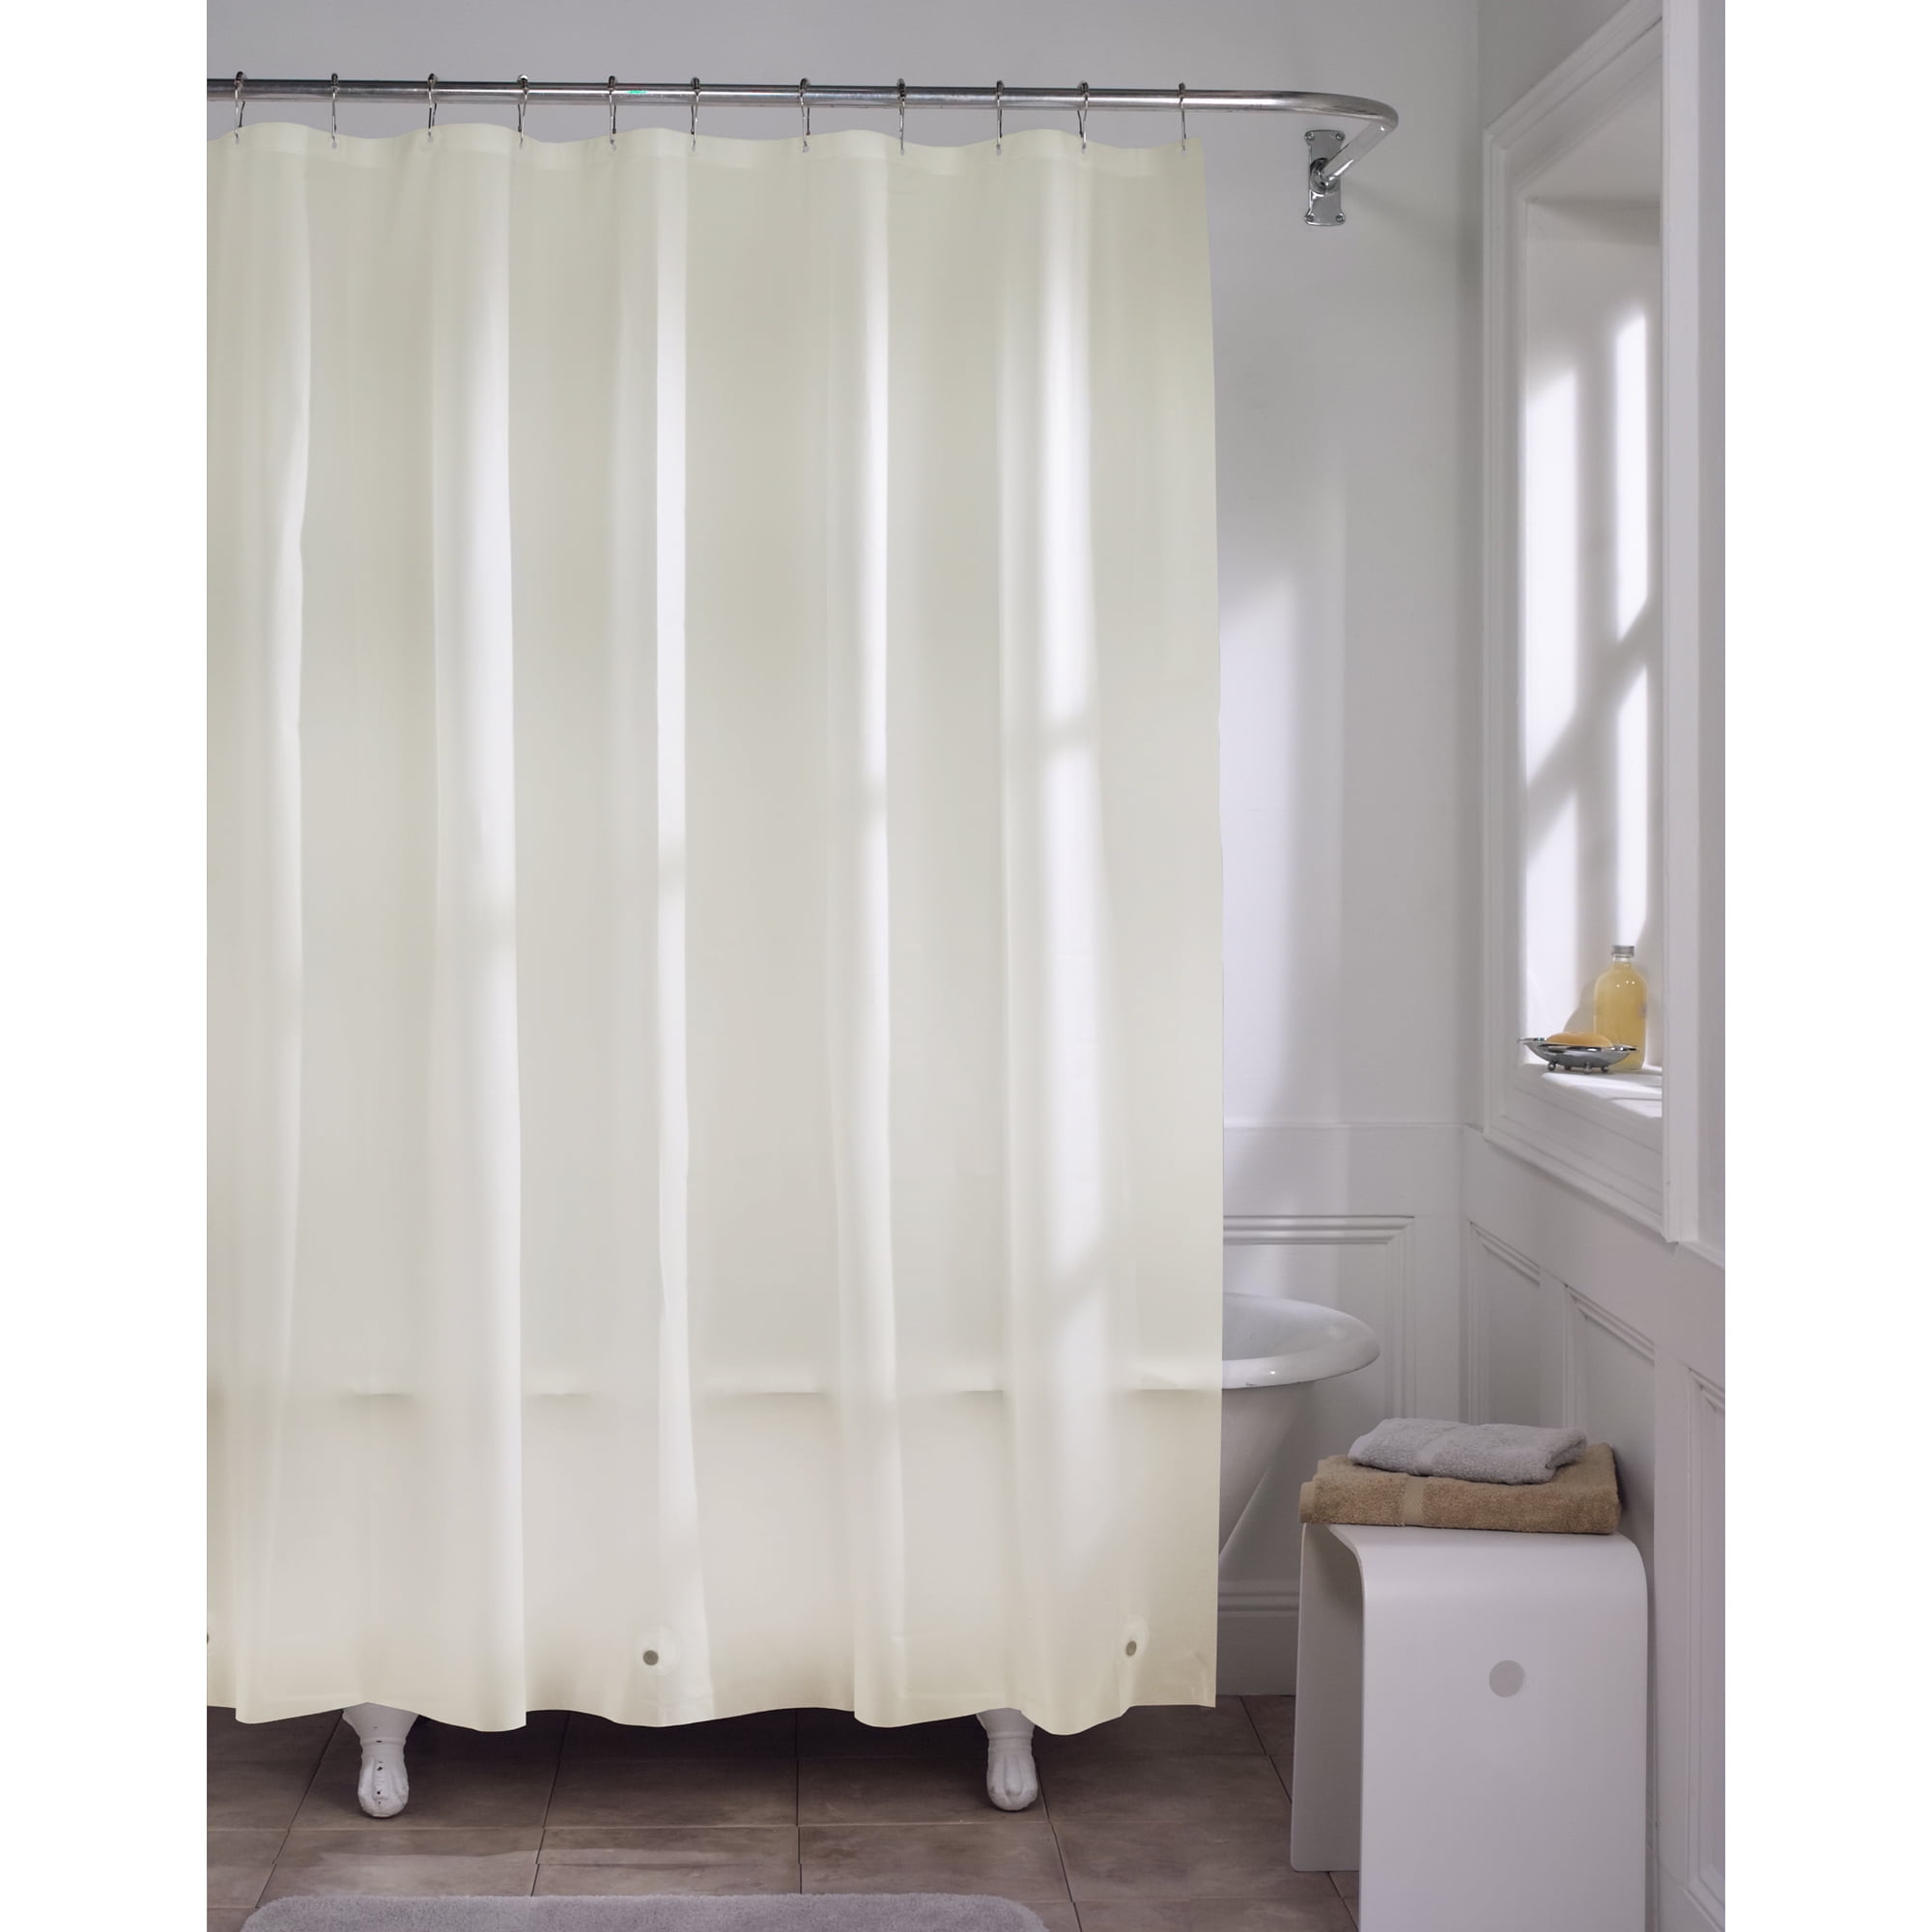 Mainstays Ivory Extra Lightweight Value PEVA Shower Liner, 70 x 72 inches, Solid Print